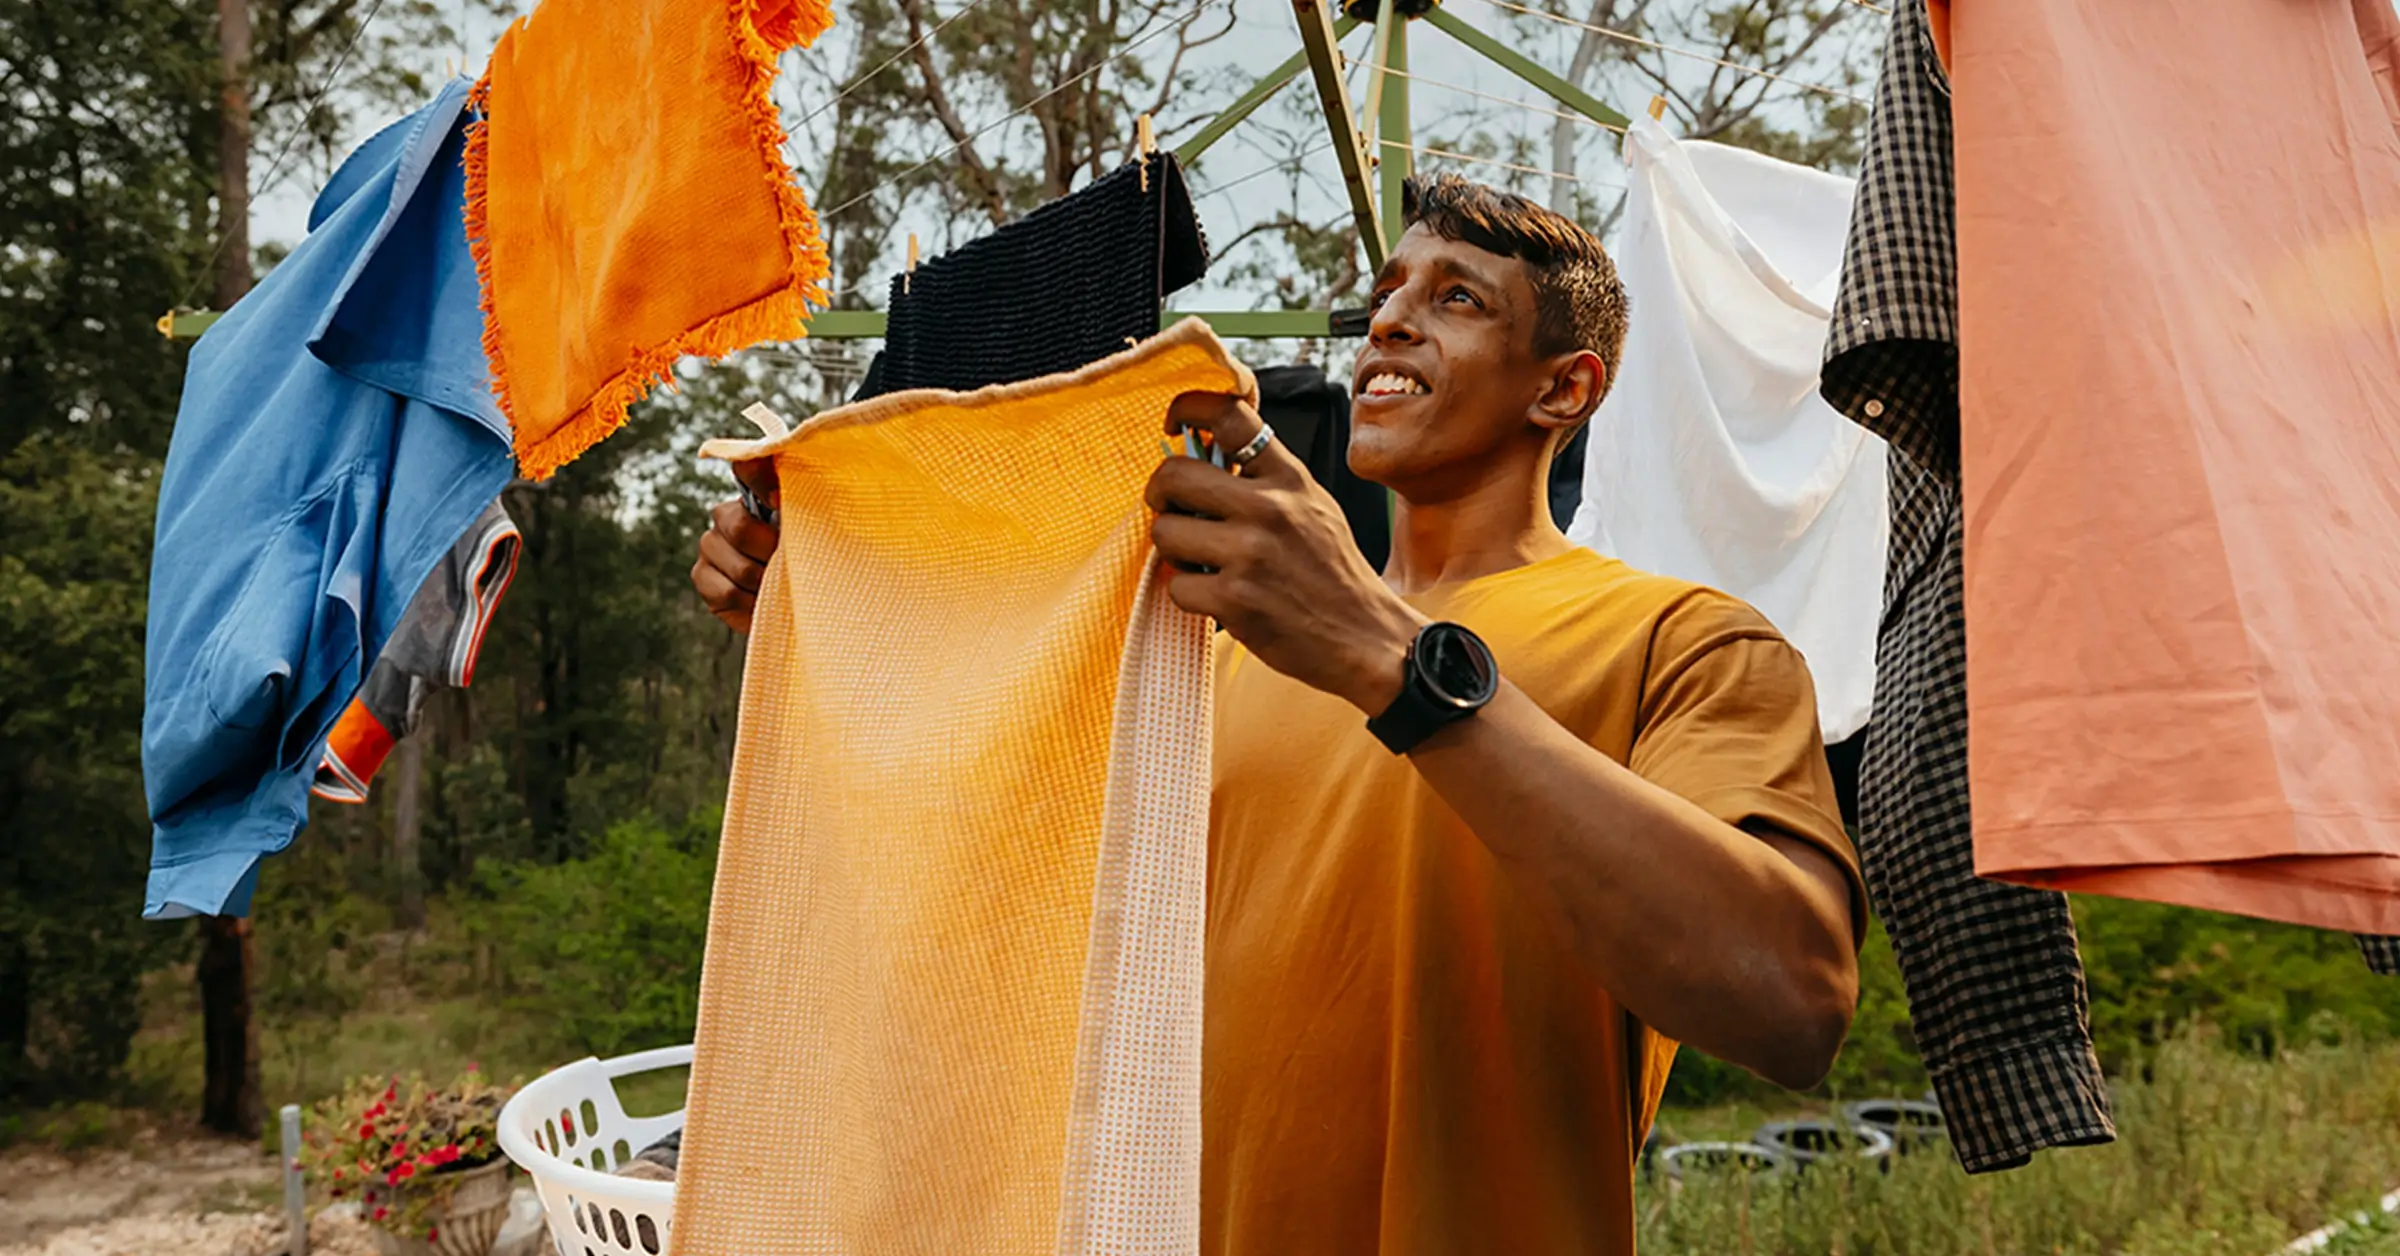 Support worker hangs an orange towel on the Hills Hoist clothesline in the backyard.